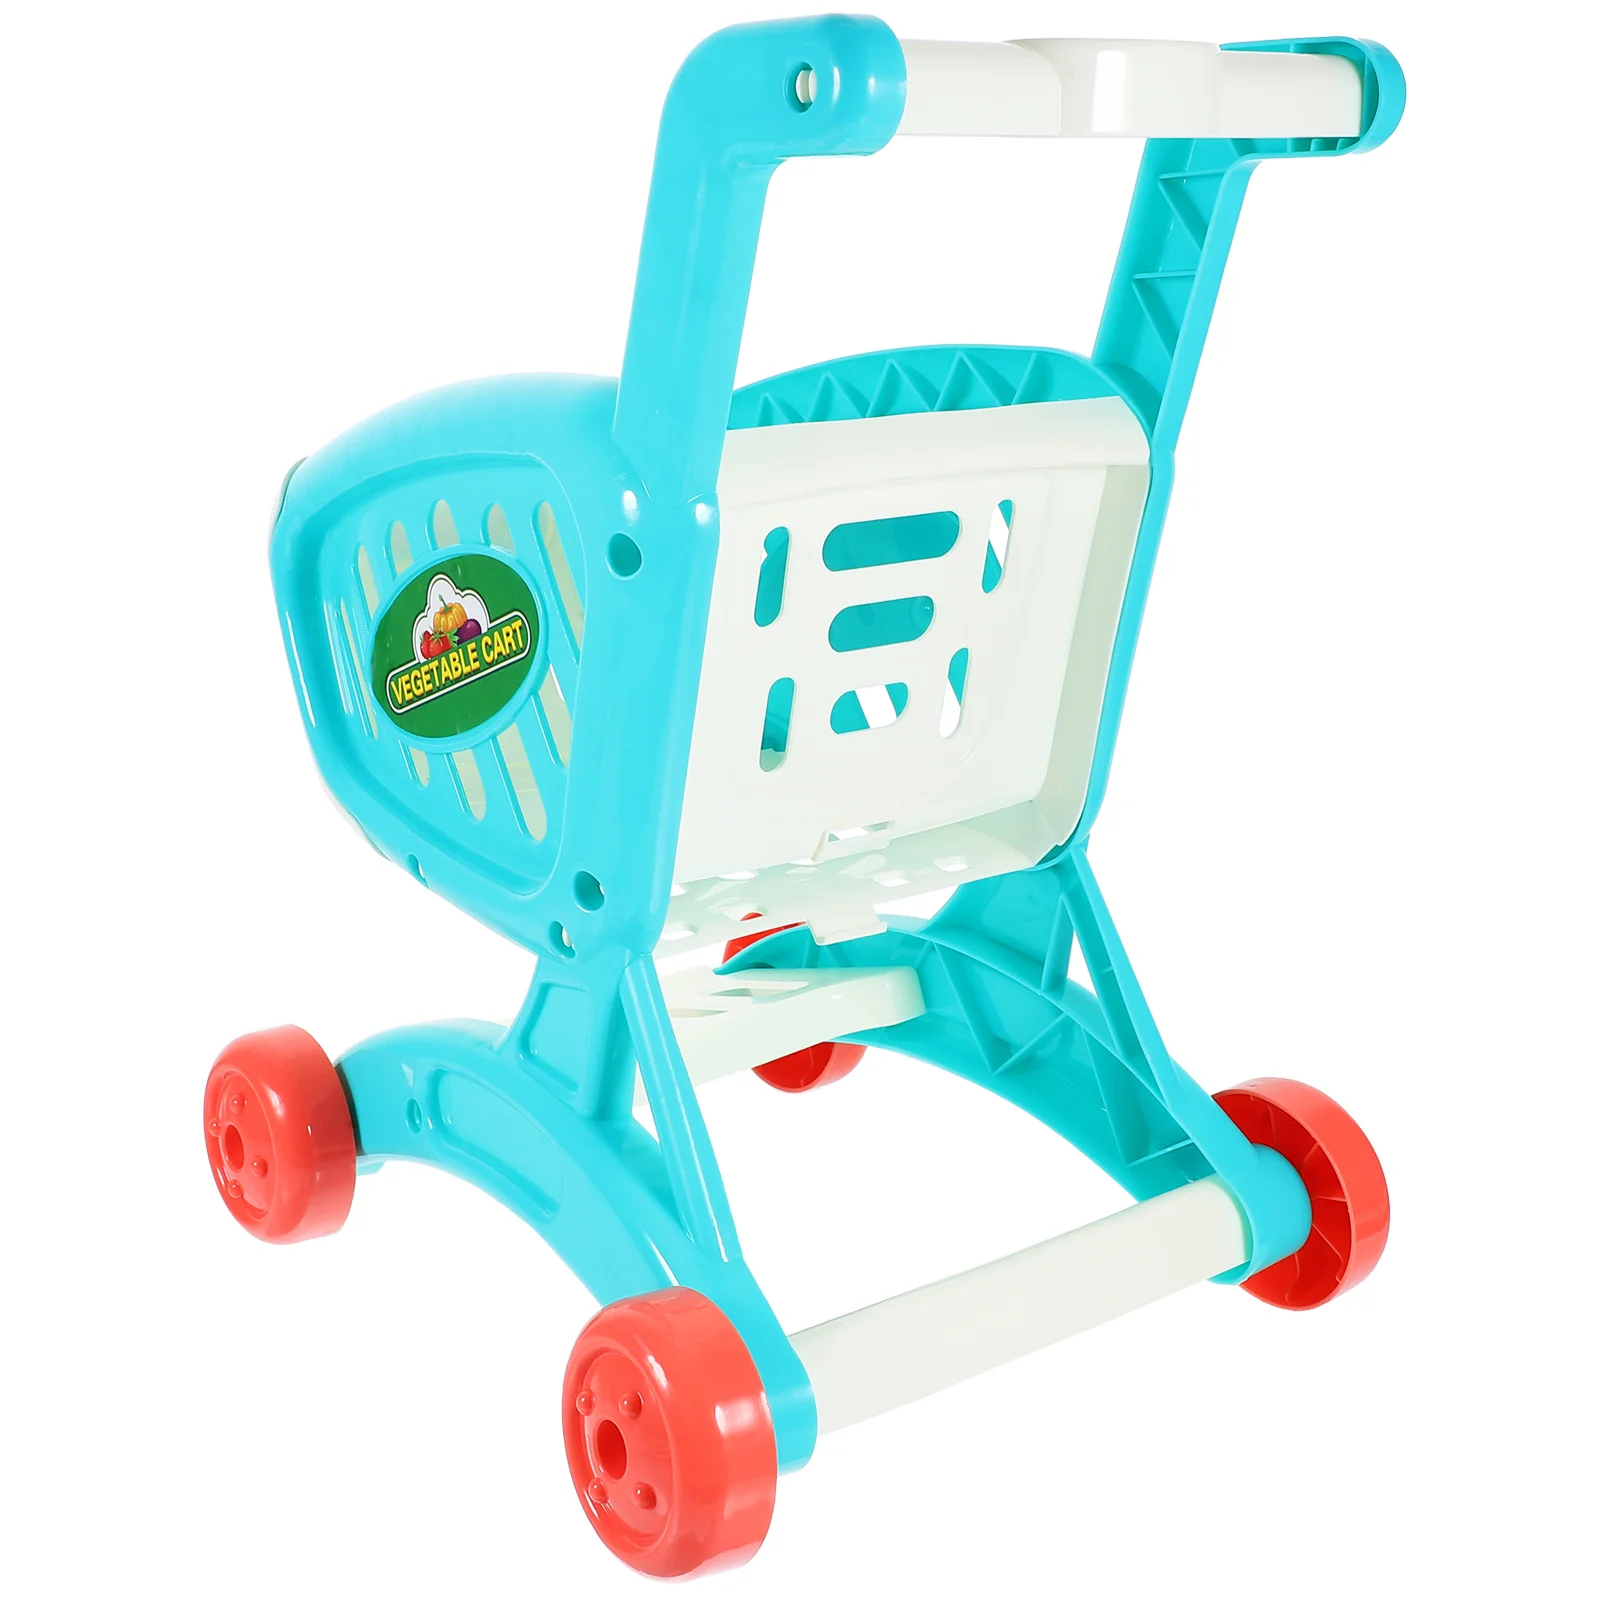 

Children's Shopping Cart Carts for Groceries Grocery Store Pretend Play Children’s Toys Dolls Storage Rack Decorate